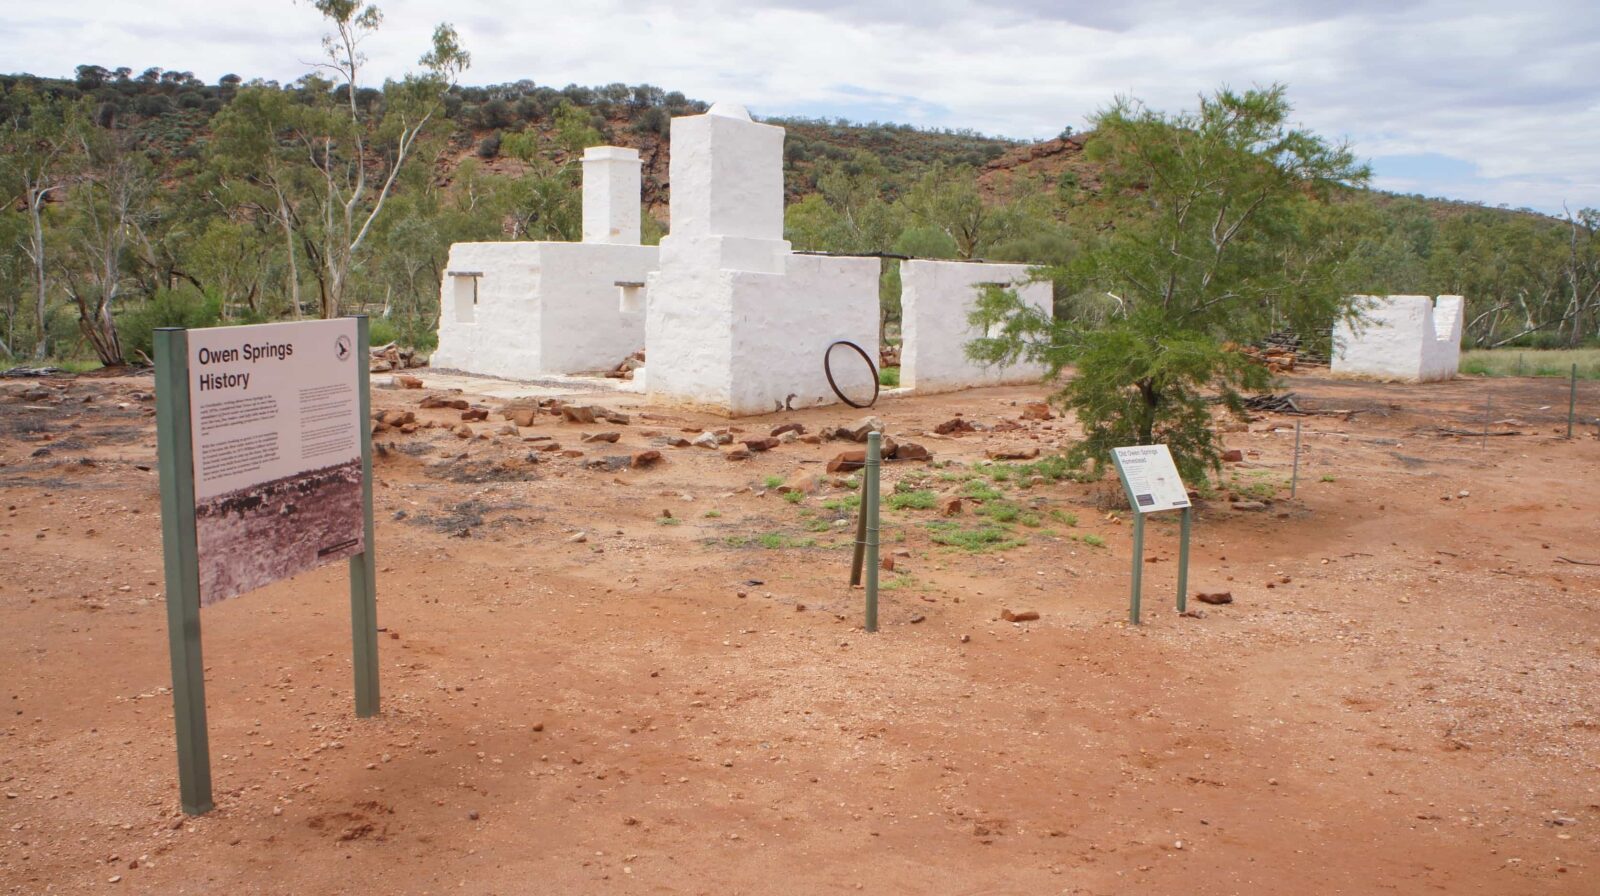 Old Owen Springs Homestead site, showing some interpretive signage and wire fencing around buildings